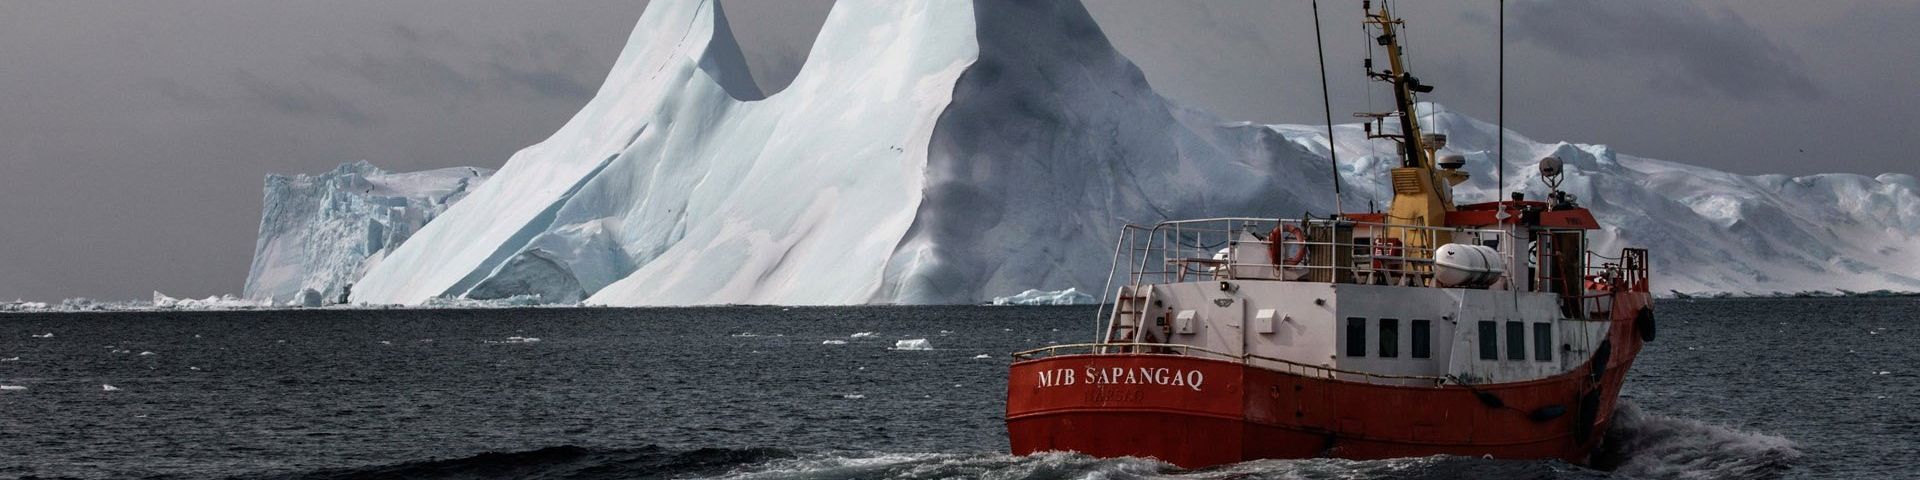 A red boat sails on cold grey water, with a huge floating iceberg behind it.